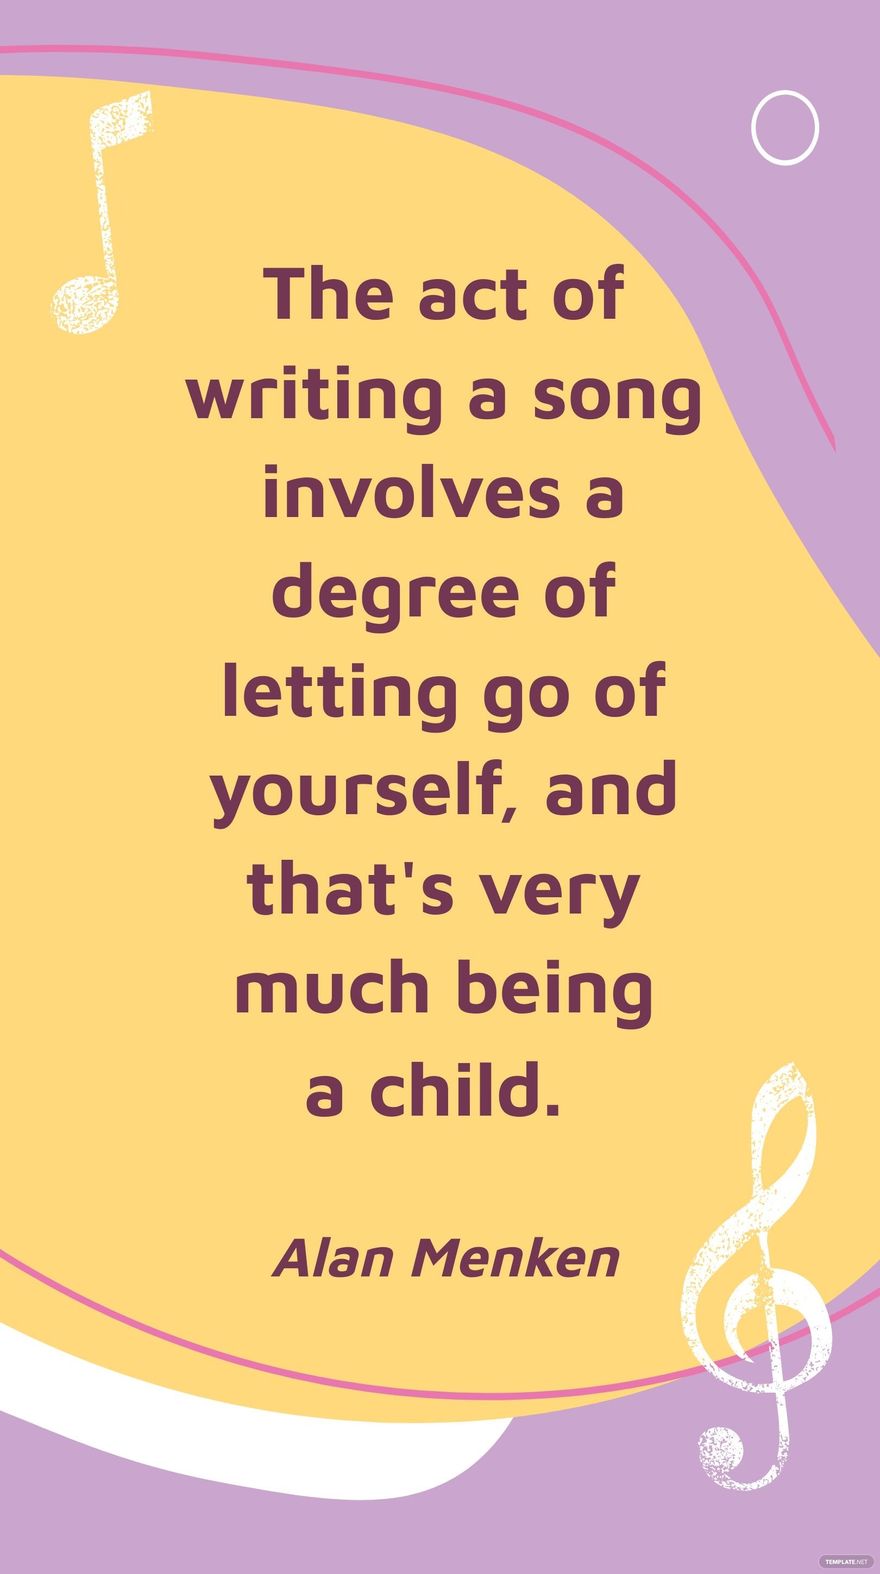 Free Alan Menken - The act of writing a song involves a degree of letting go of yourself, and that's very much being a child. in JPG